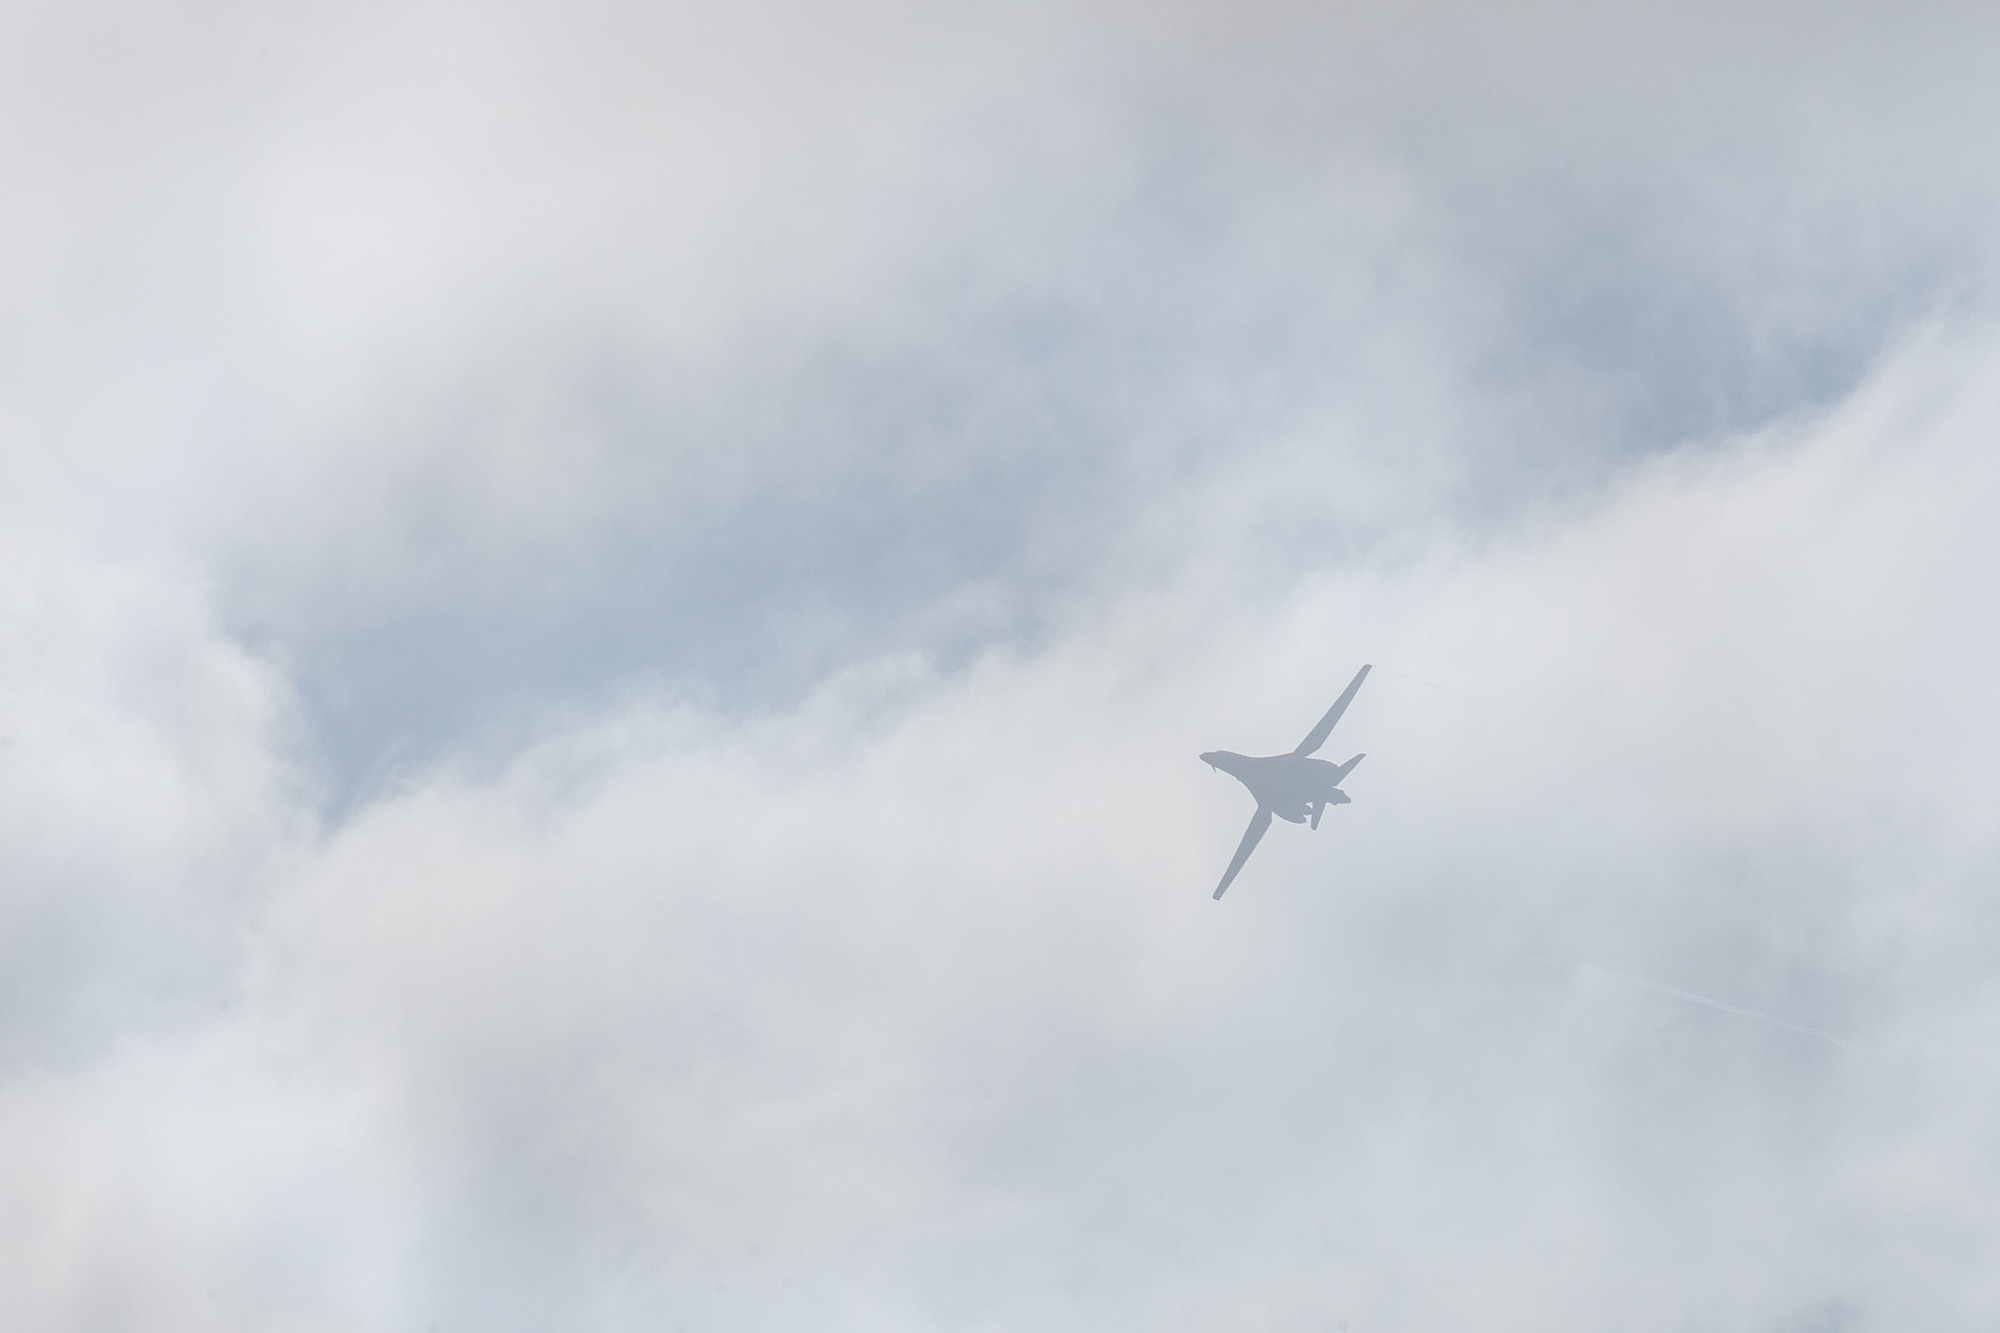 A U.S. Air Force B-1B Lancer from Ellsworth Air Force Base, S.D., flies over the flightline at Andersen Air Force Base, Guam, after completing a Bomber Task Force mission, Dec. 10, 2020. BTF supports Pacific Air Forces’ strategic deterrence mission and its commitment to the security and stability of the Indo-Pacific region. (U.S. Air Force photo by Senior Airman Tristan Day)